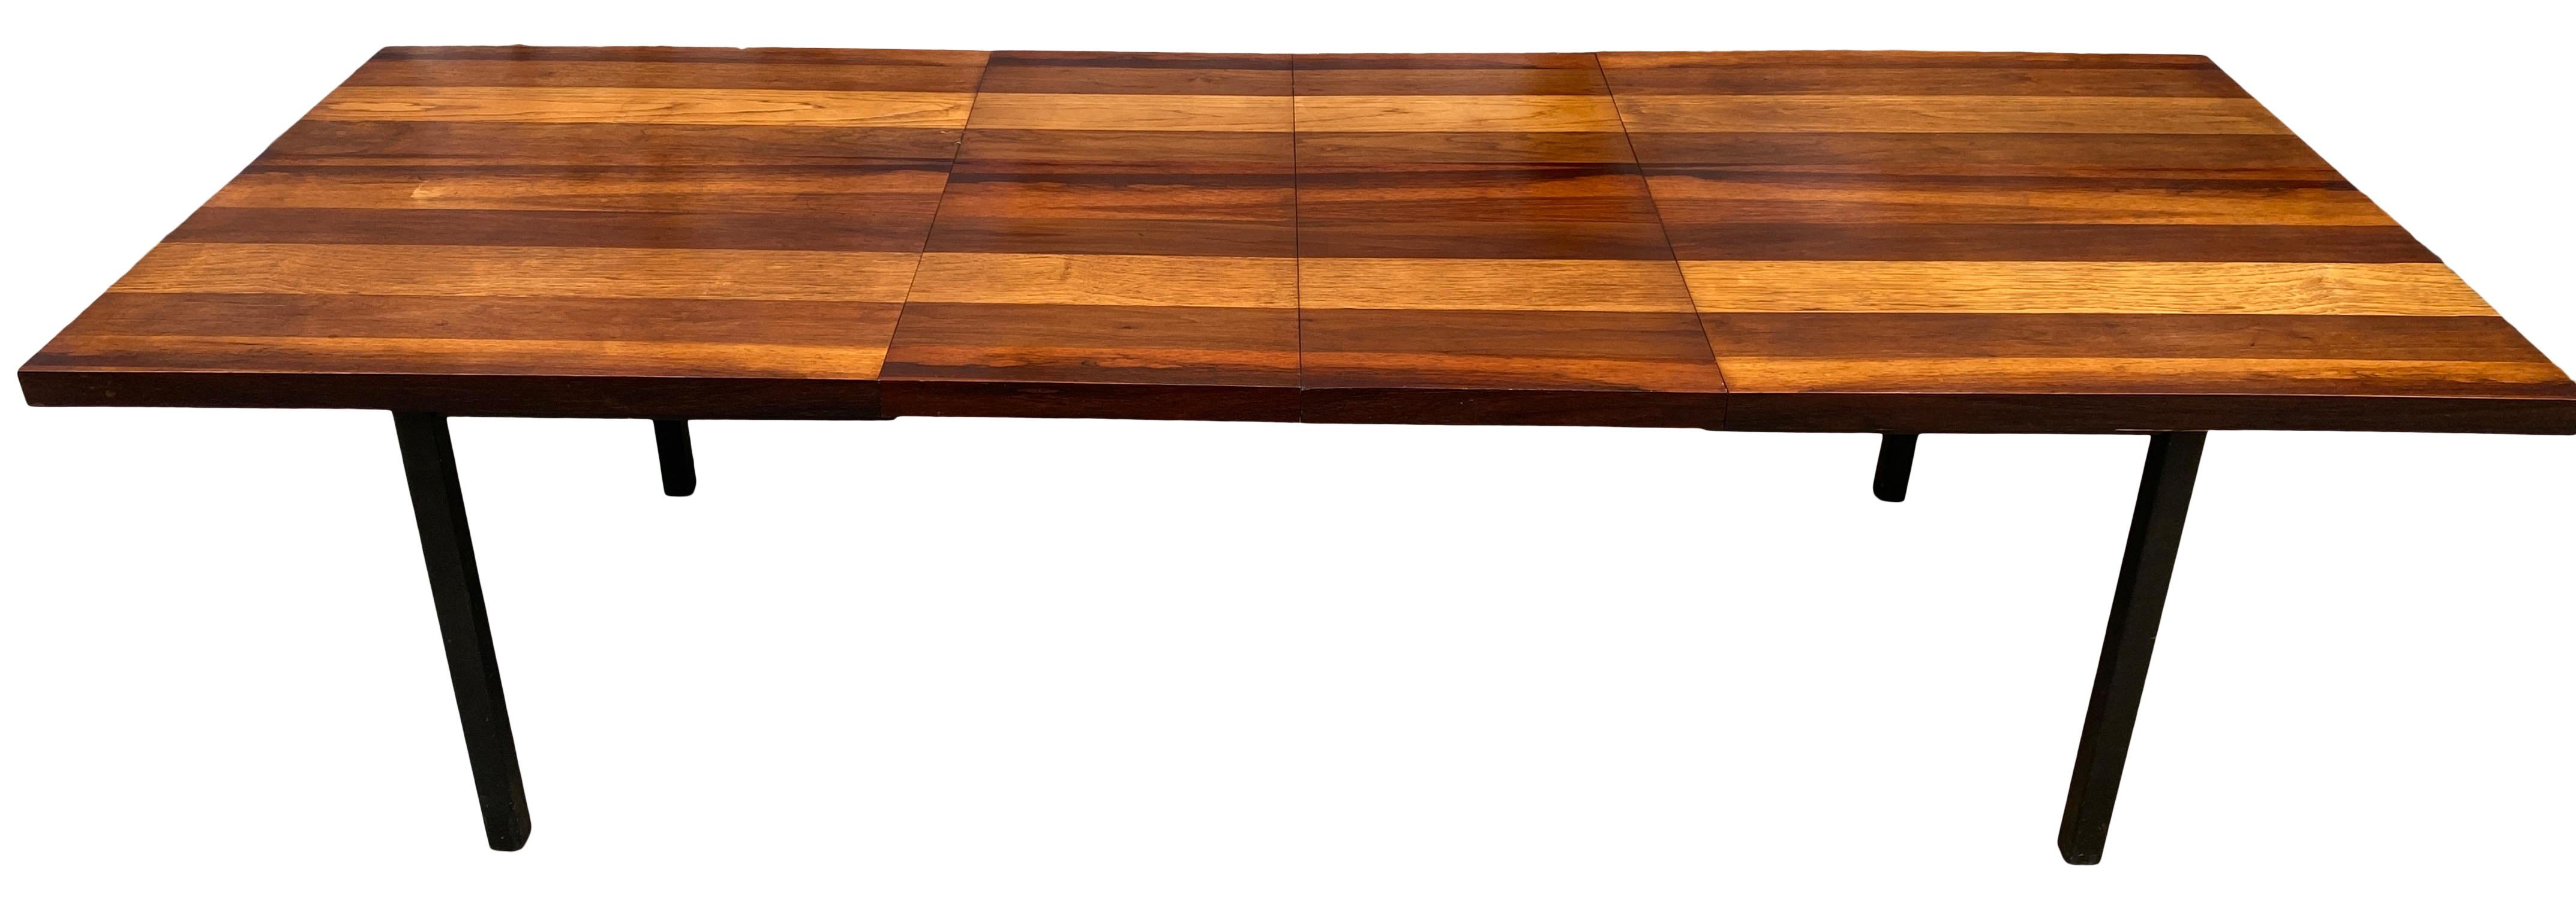 Mid-Century Modern Midcentury Tri-Wood Expandable Dining Table by Milo Baughman with '2' Leaves